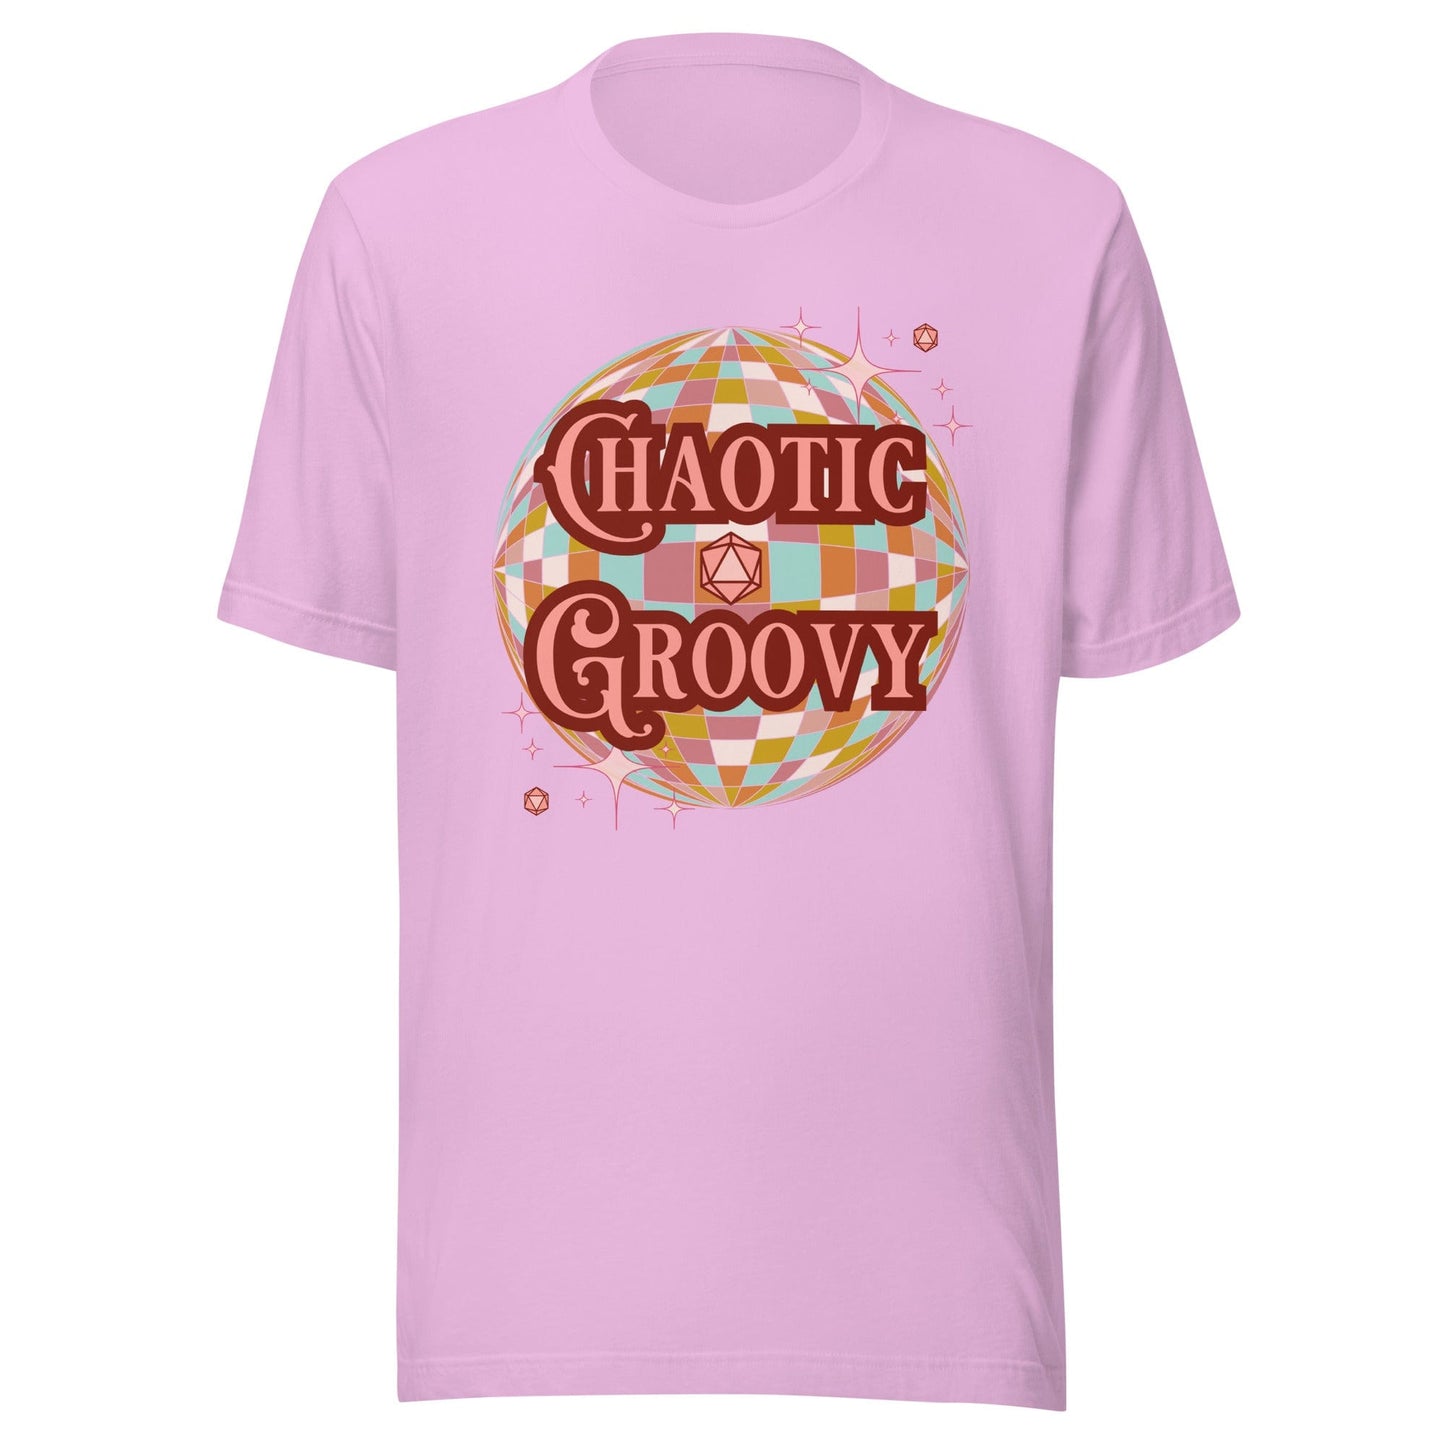 Pre-order Chaotic Groovy T-shirt